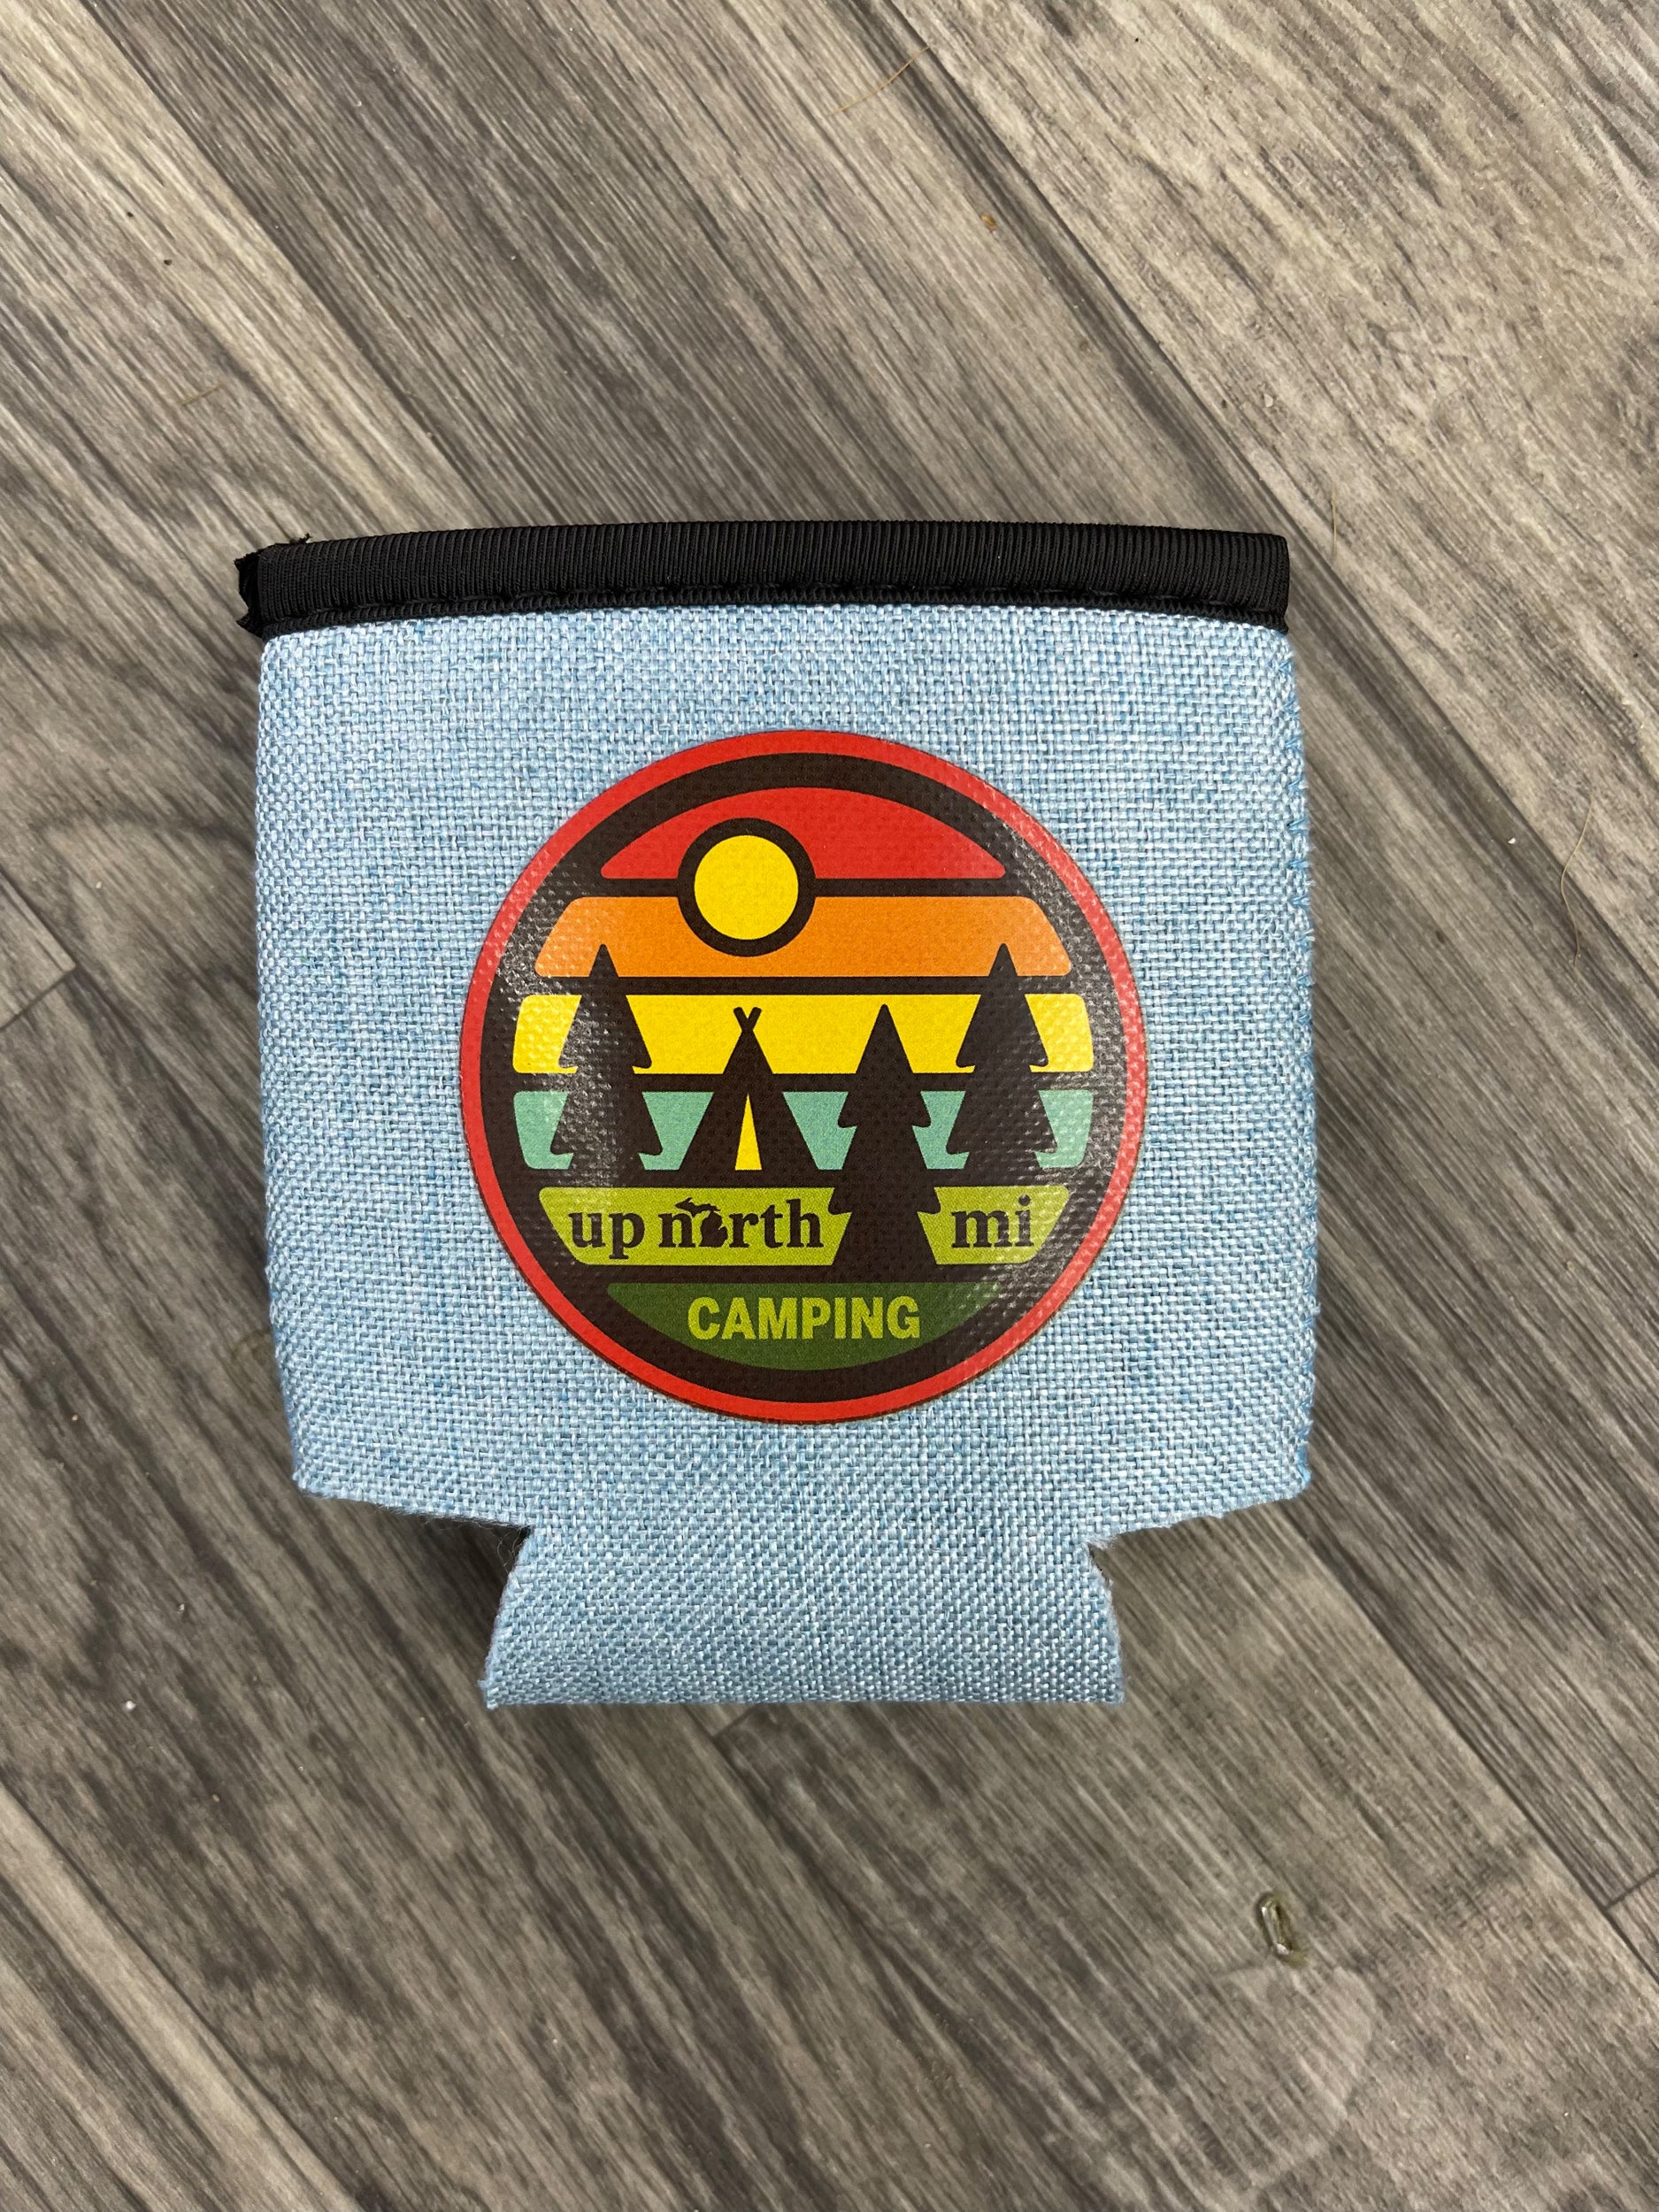 Camping Up North - Badge - Heather Blue Koozie